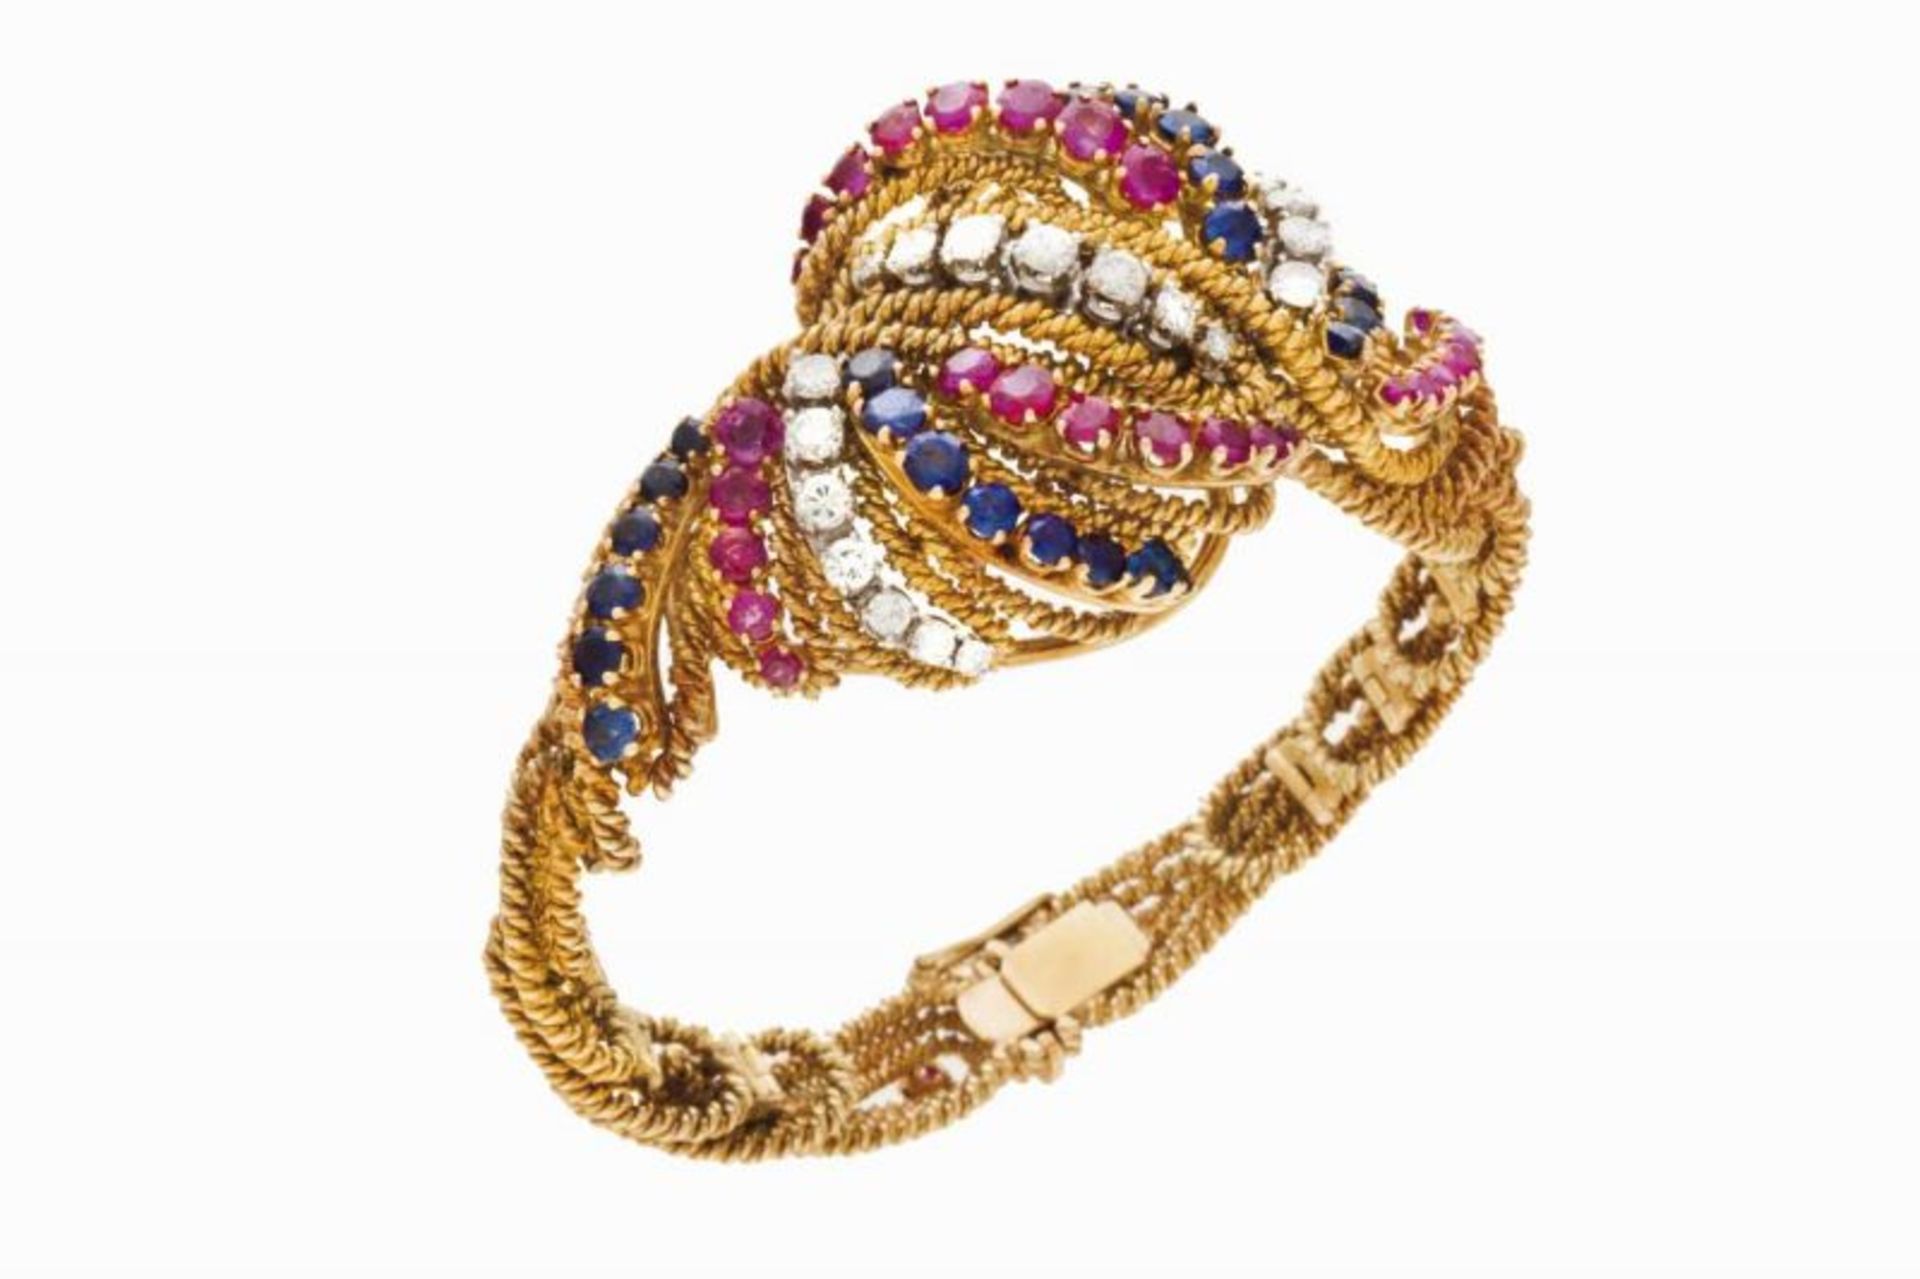 A bangle Braided twisted gold wire, centre set with brilliant cut rubies, sapphires and 21 brilliant